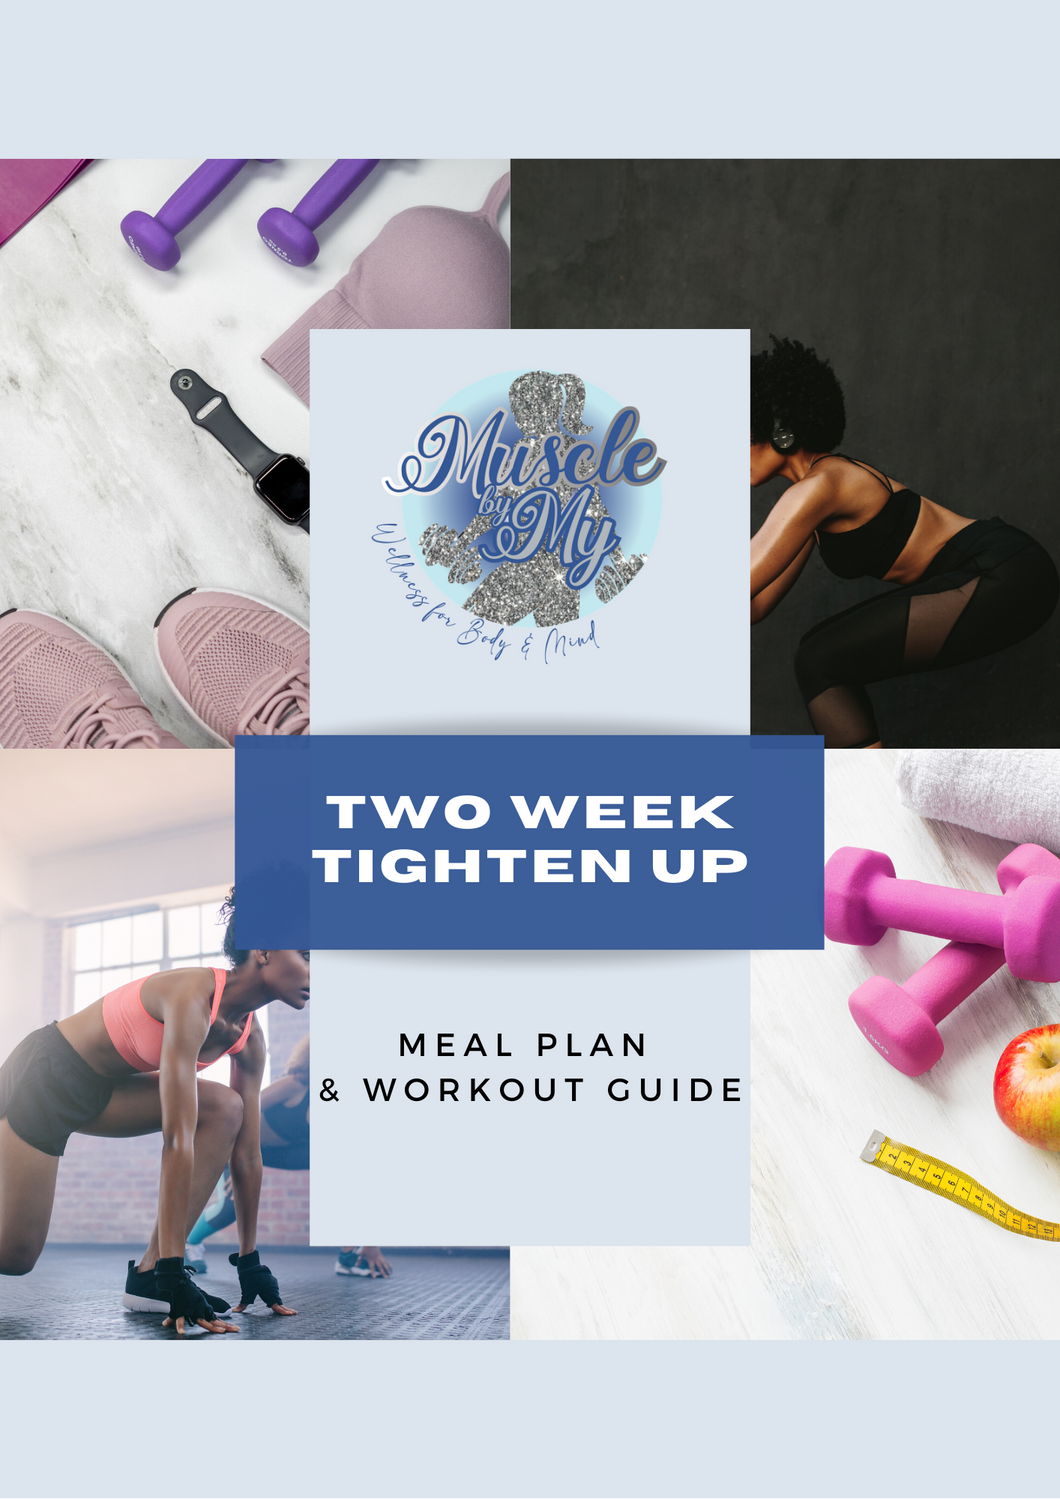 Two Week Tighten Up - Full Body Guide